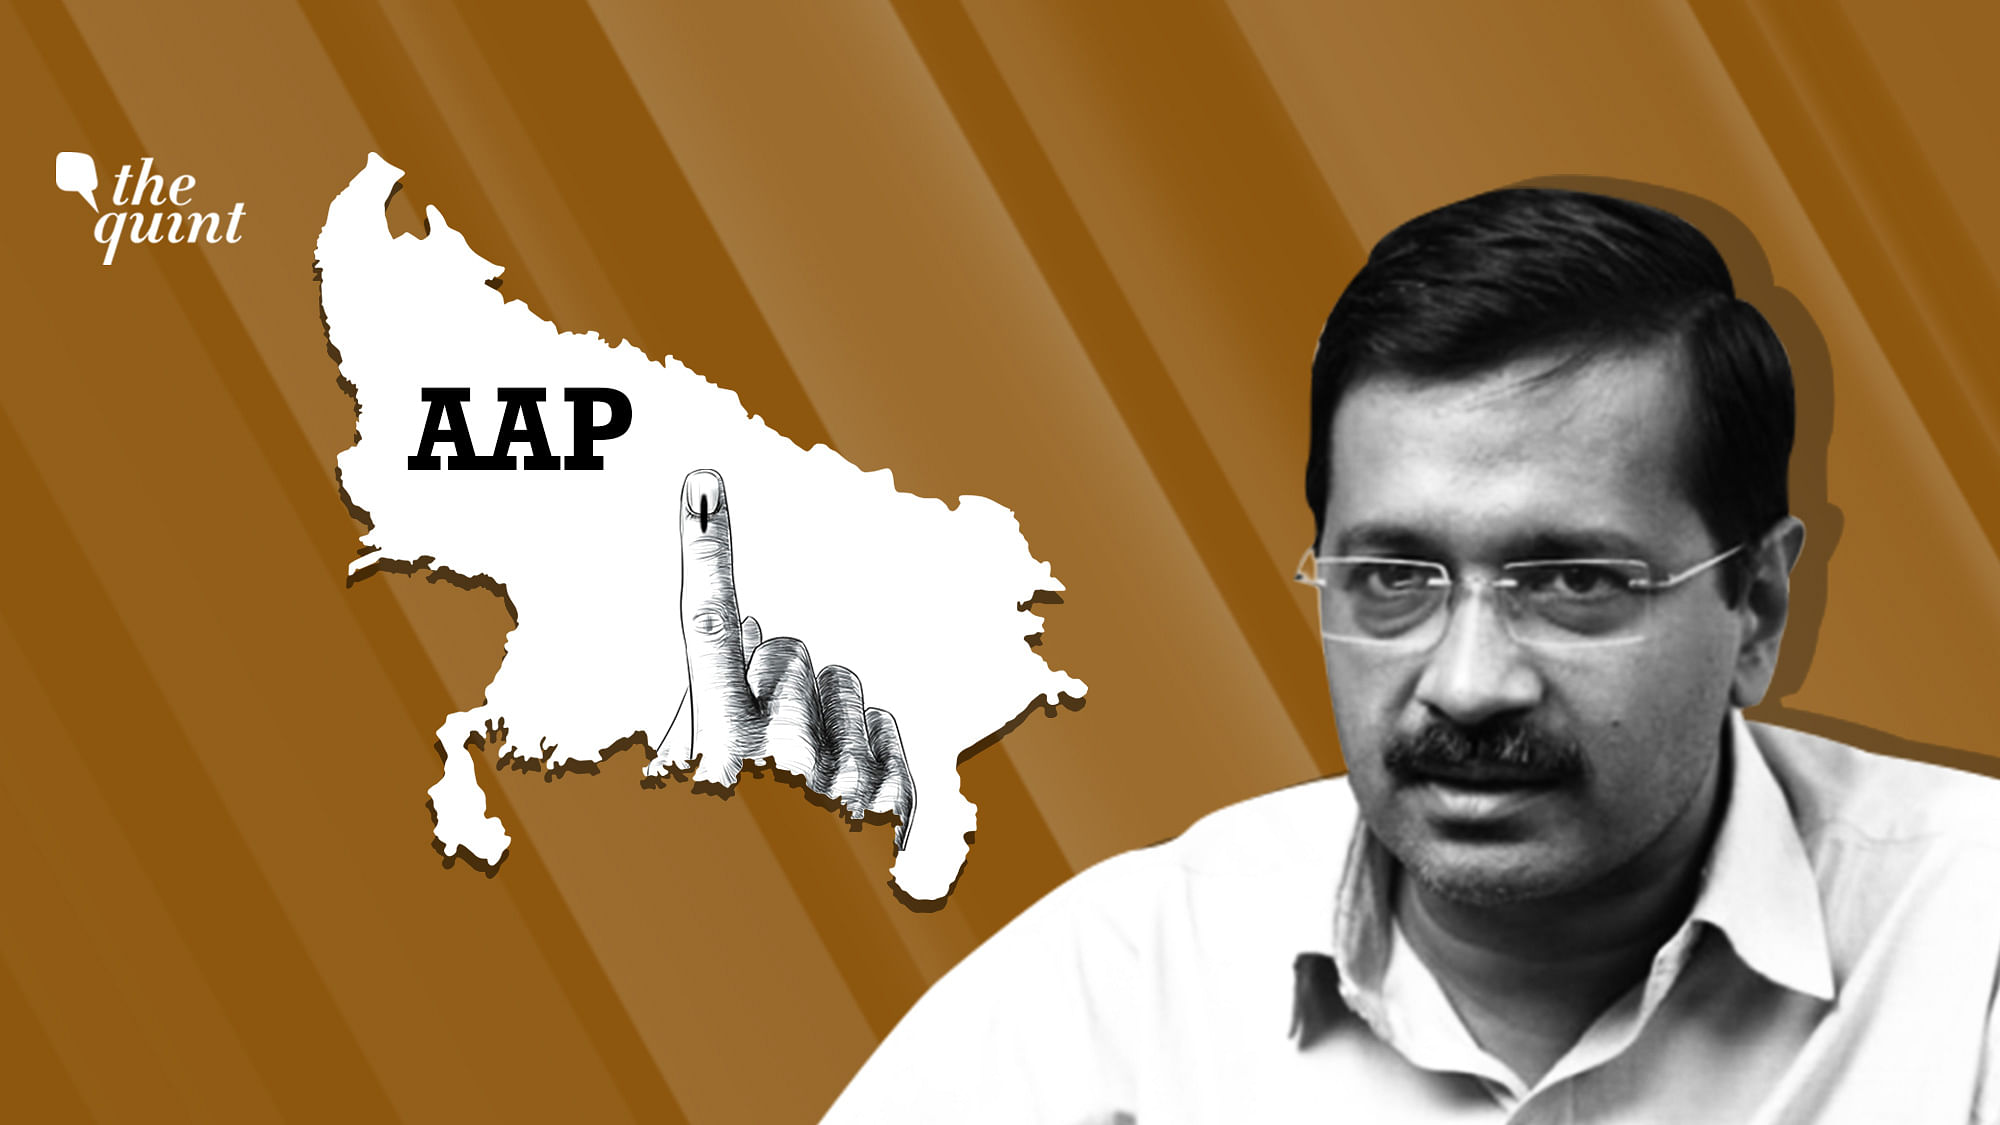 AAP convener Arvind Kejriwal has announced that his party will contest the 2022 Uttar Pradesh Assembly elections